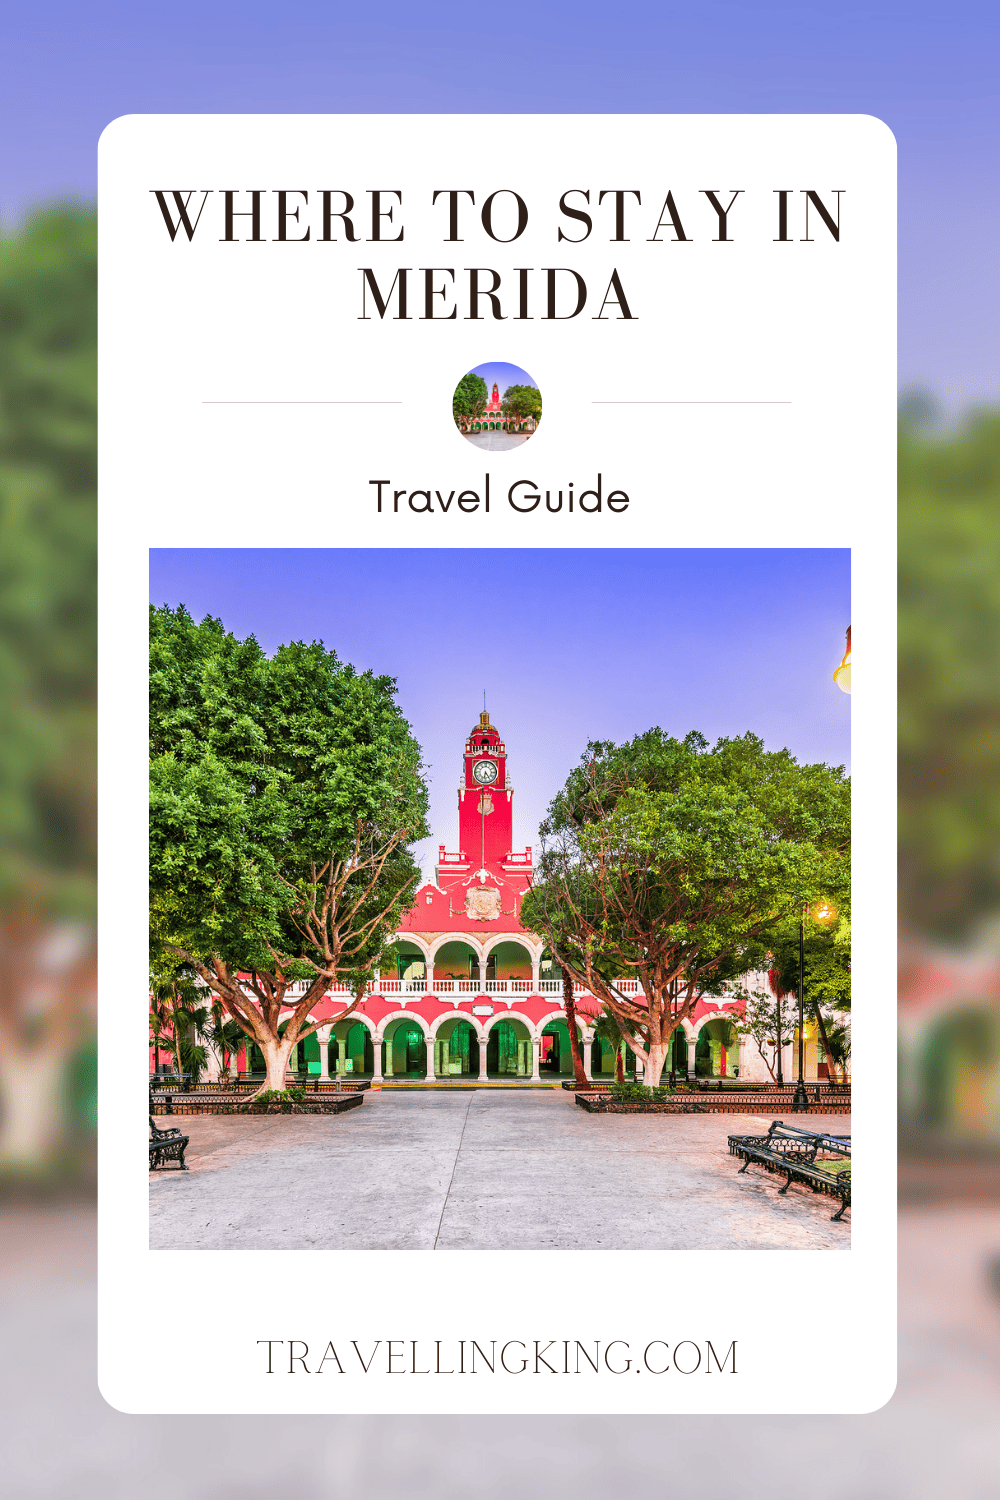 Where to stay in Merida